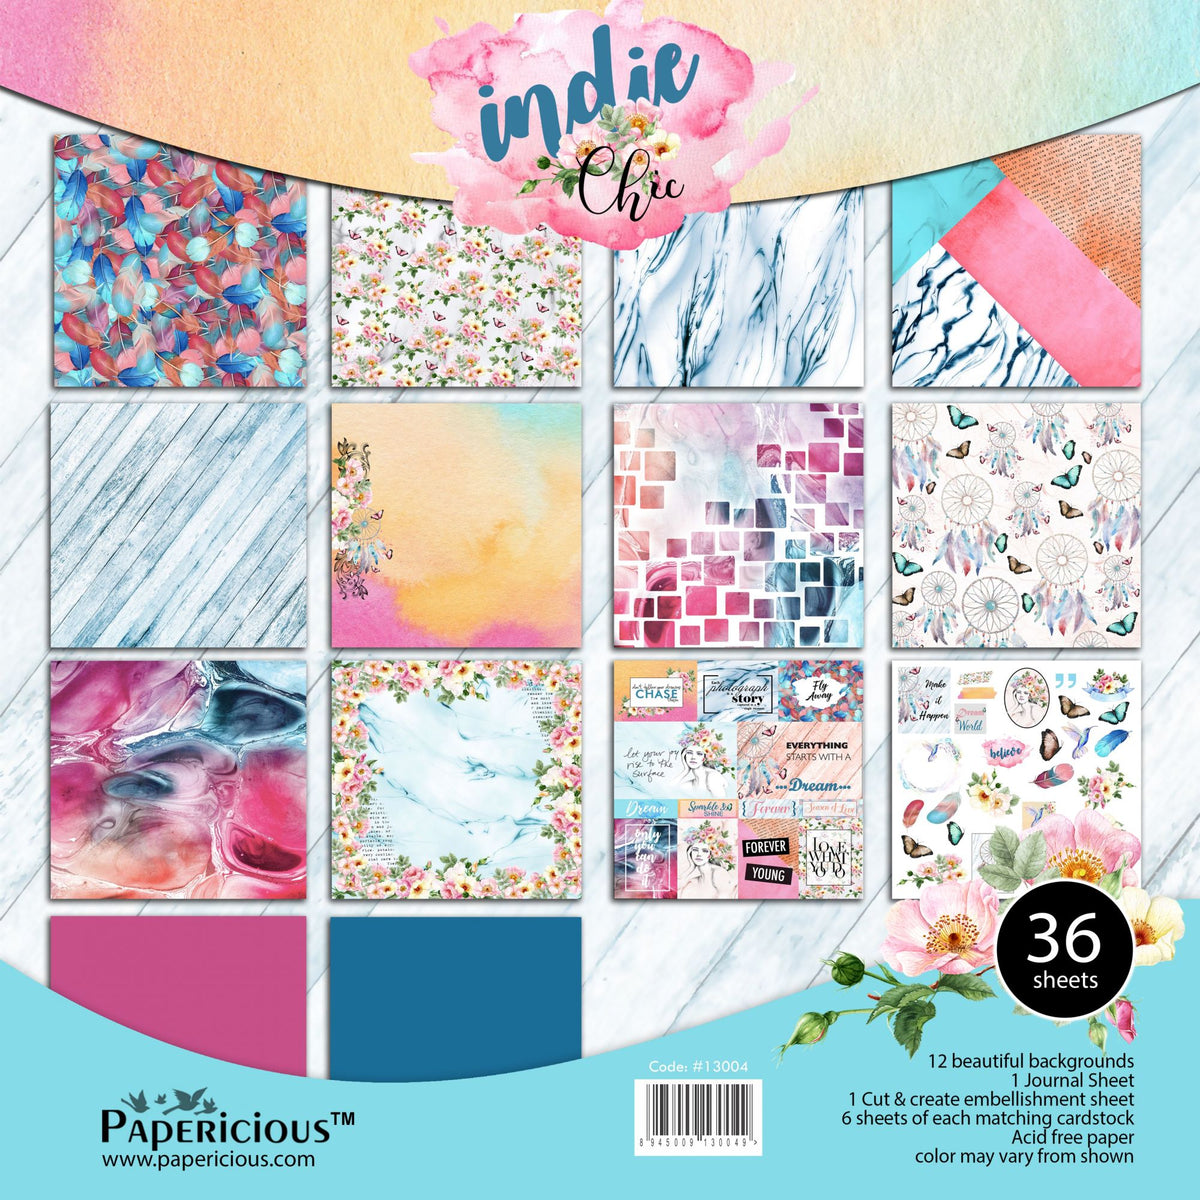 PAPERICIOUS - Indie Chic - Designer Pattern Printed Scrapbook Papers 12x12 inch / 36 sheets